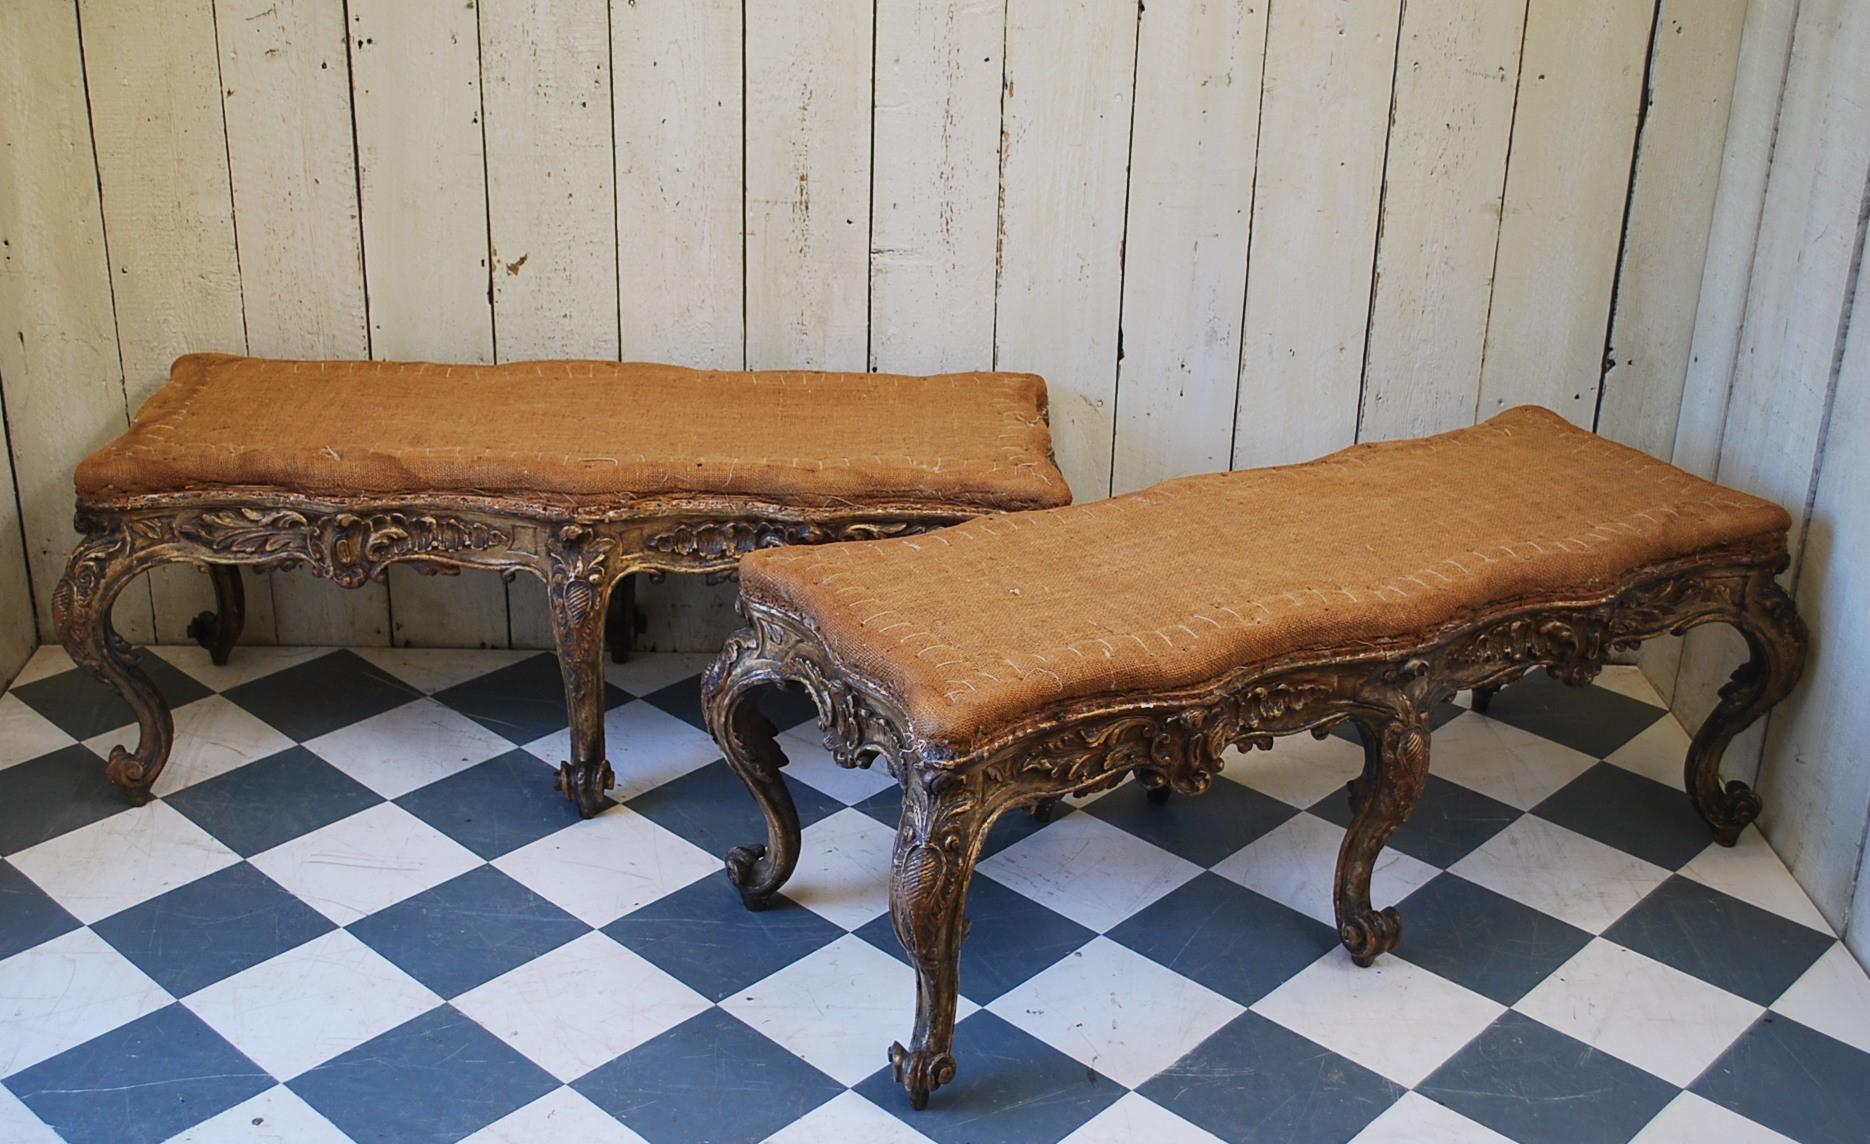 A superb pair of rare Italian carved giltwood Rococo stools, standing on cabriole legs terminating on scroll feet. Beautifully embellished in deep carving on all sides, with serpentine shaped overstuffed upholstered seats ready for upholstery. A